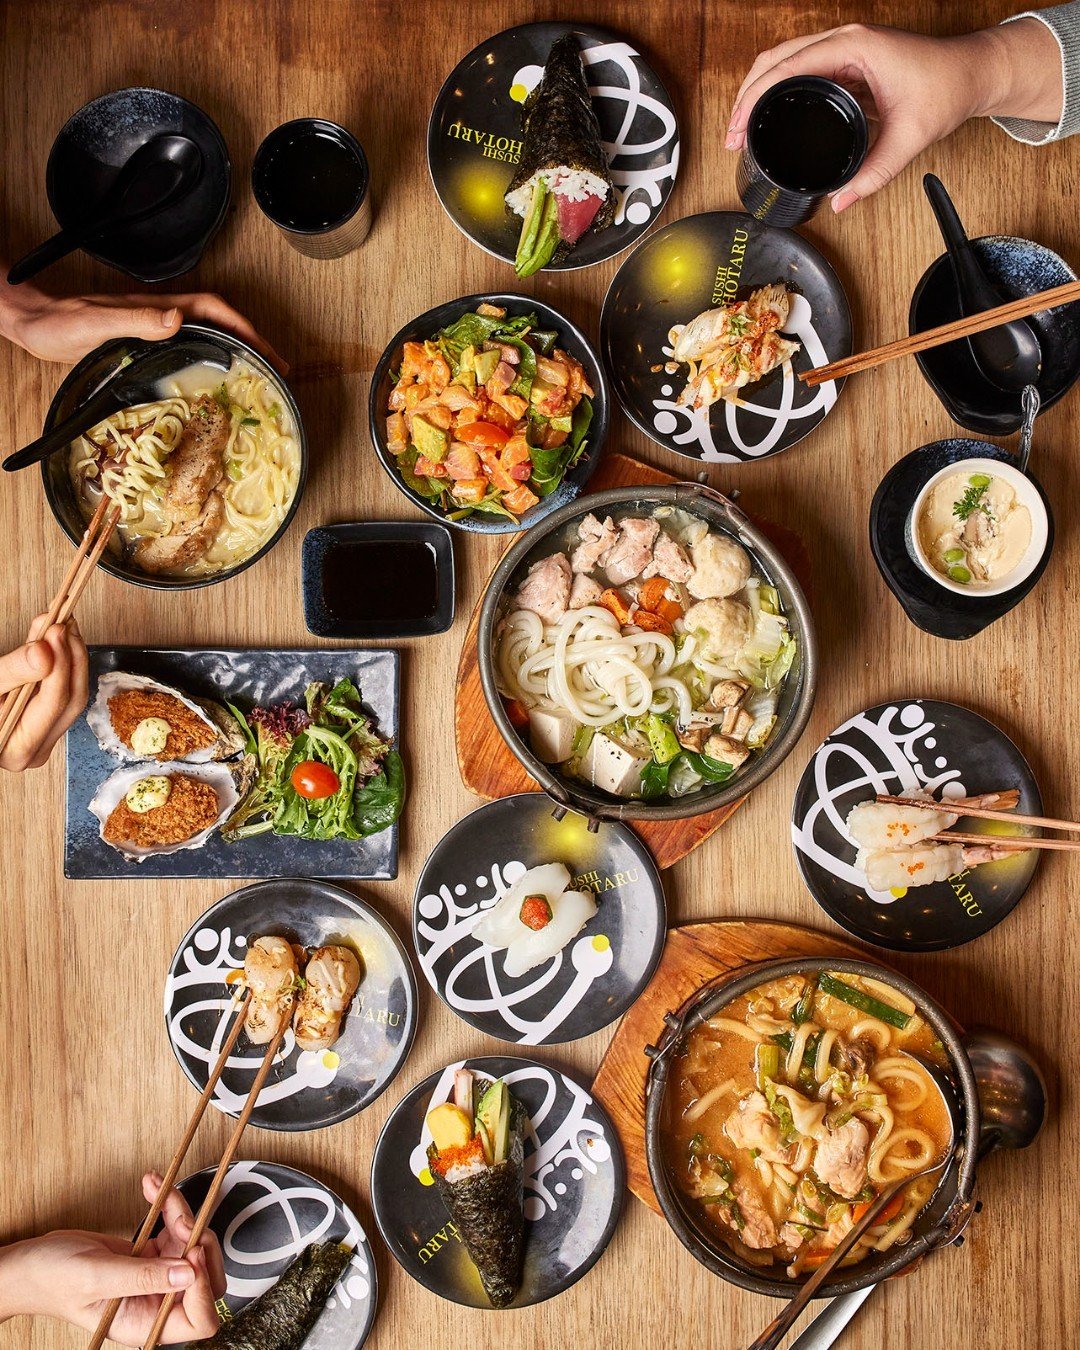 Hey Hotaru fam! It's time to gather around and share the love for our favourite dishes. 

Who's bringing their appetite? 😋😋

#sushihotaru #sushilovers #sushitrain #sushirestaurant #thegaleries #sydneycbd #sushi #sydneyrestaurant #japaneserestaurant